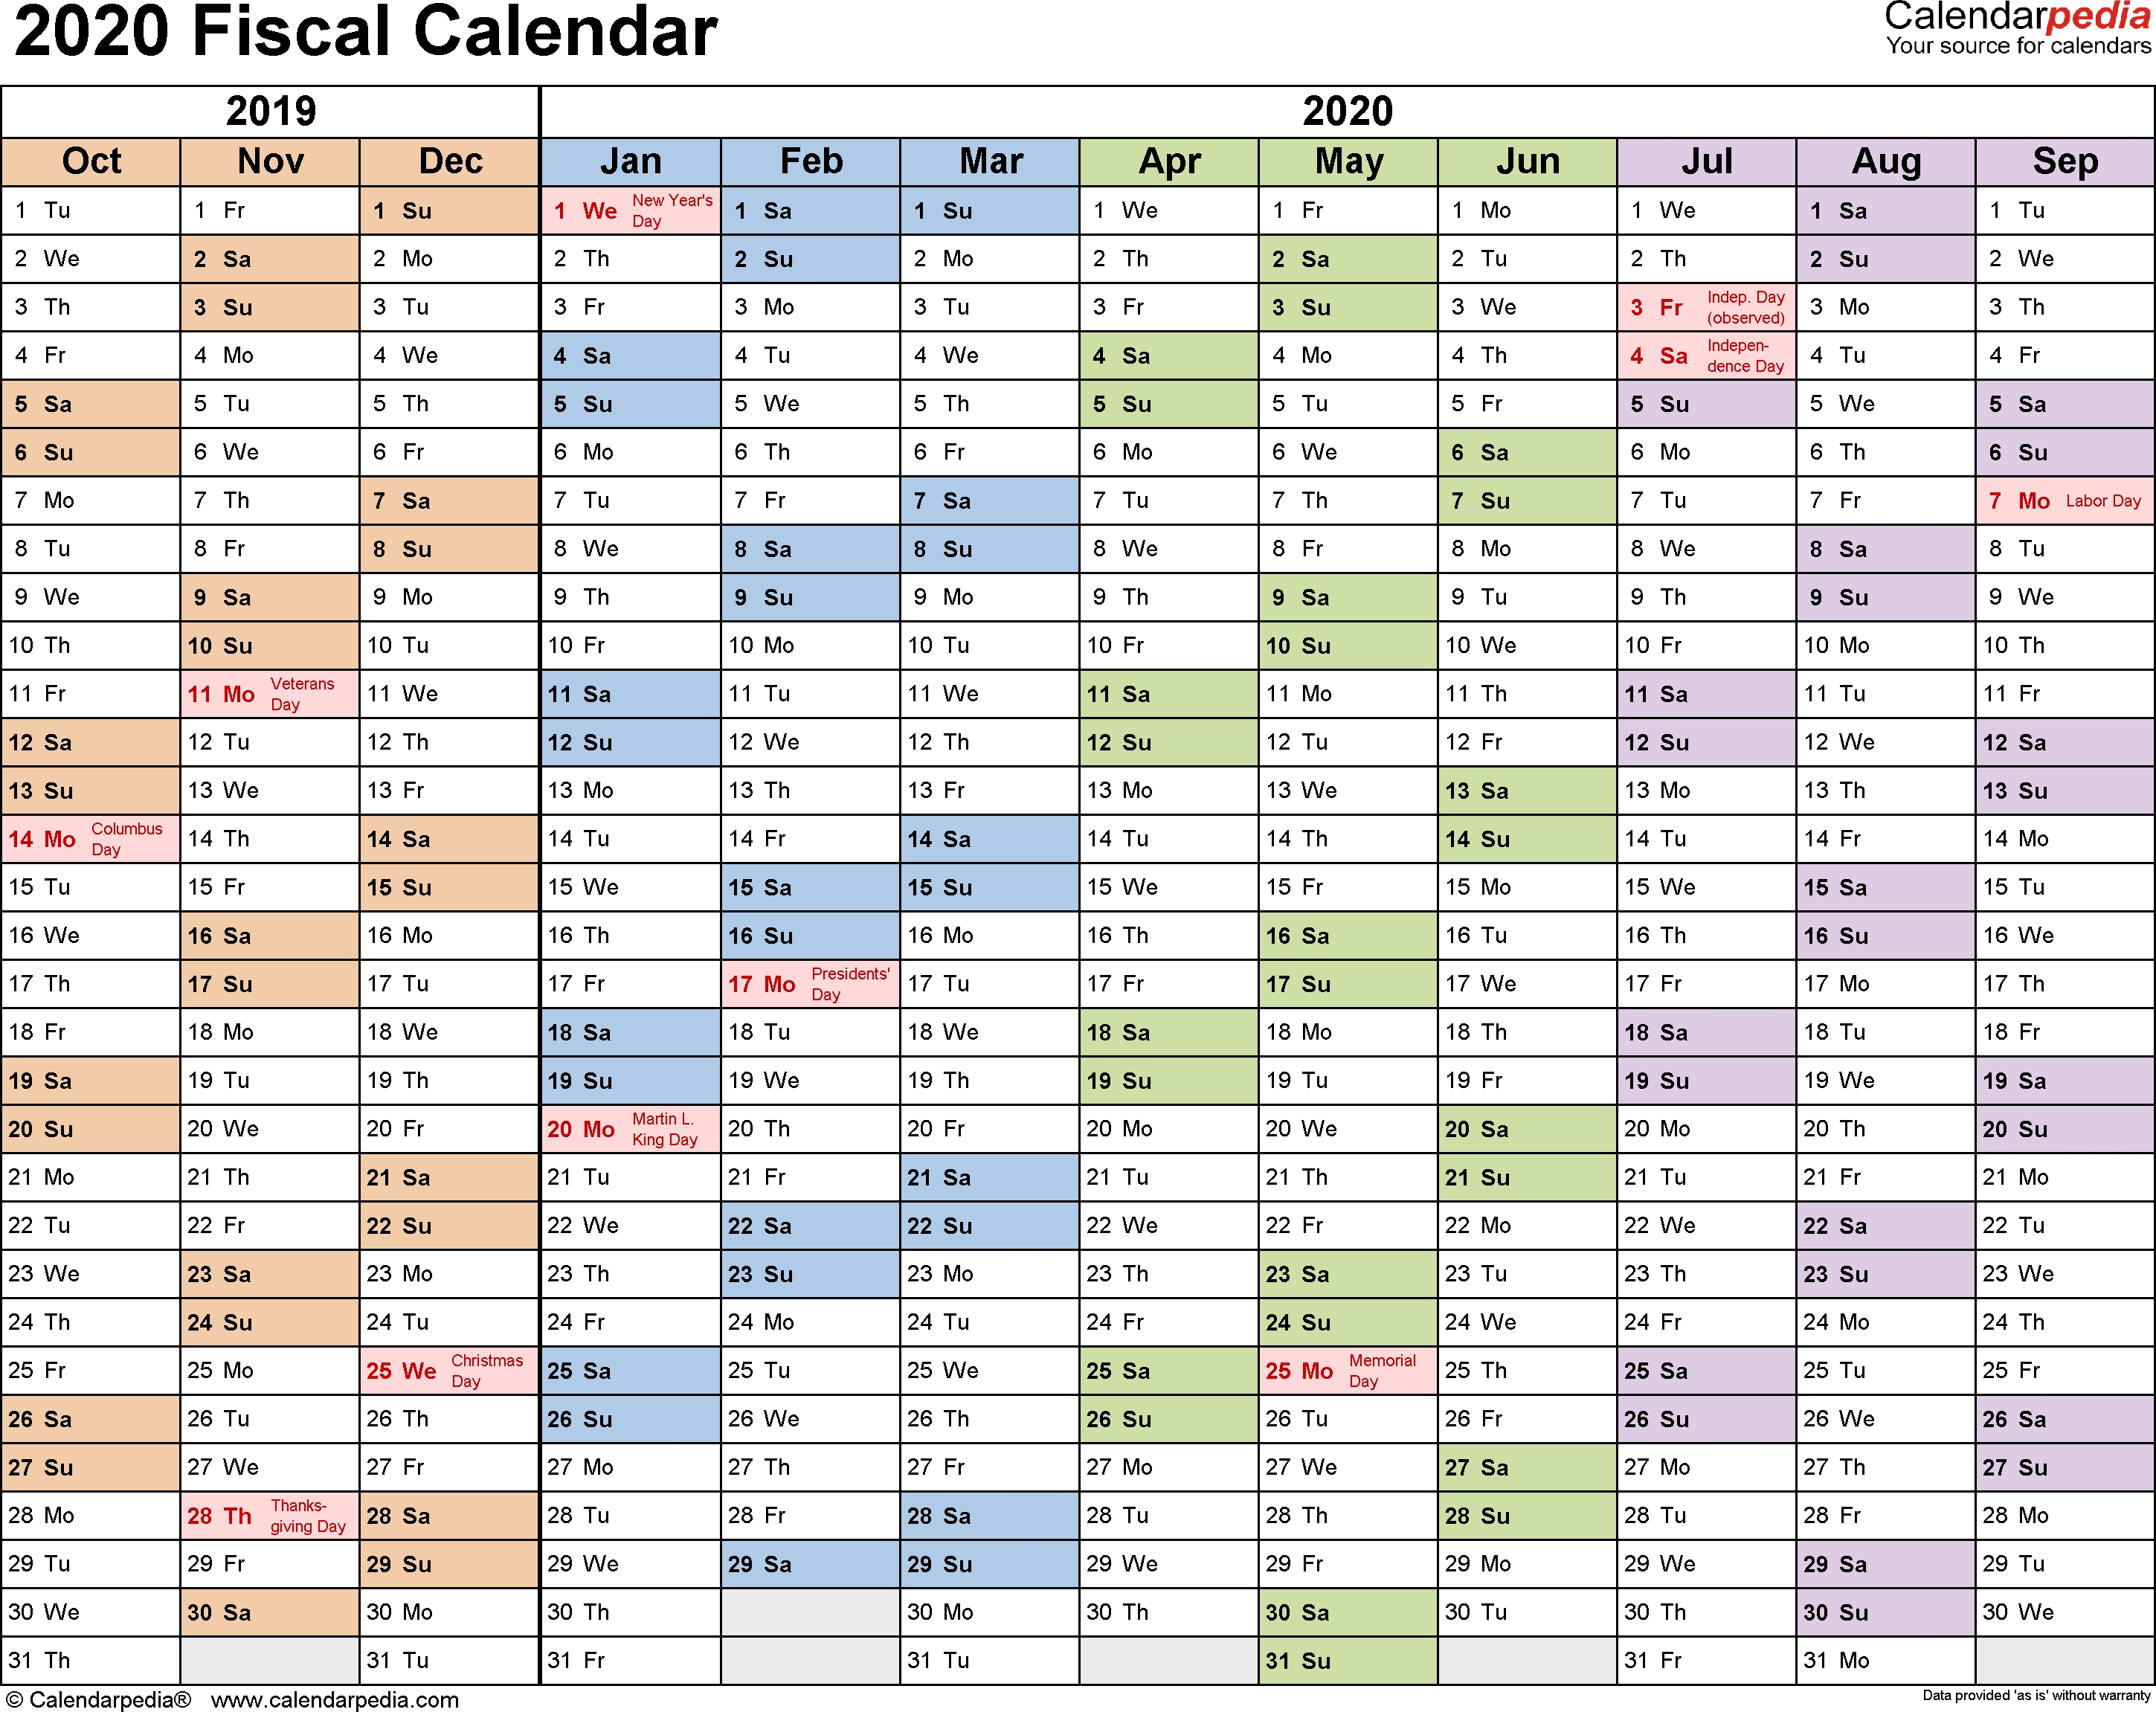 Fiscal Calendars 2020 As Free Printable Word Templates-Free Printable Budget Calendar Template 2020